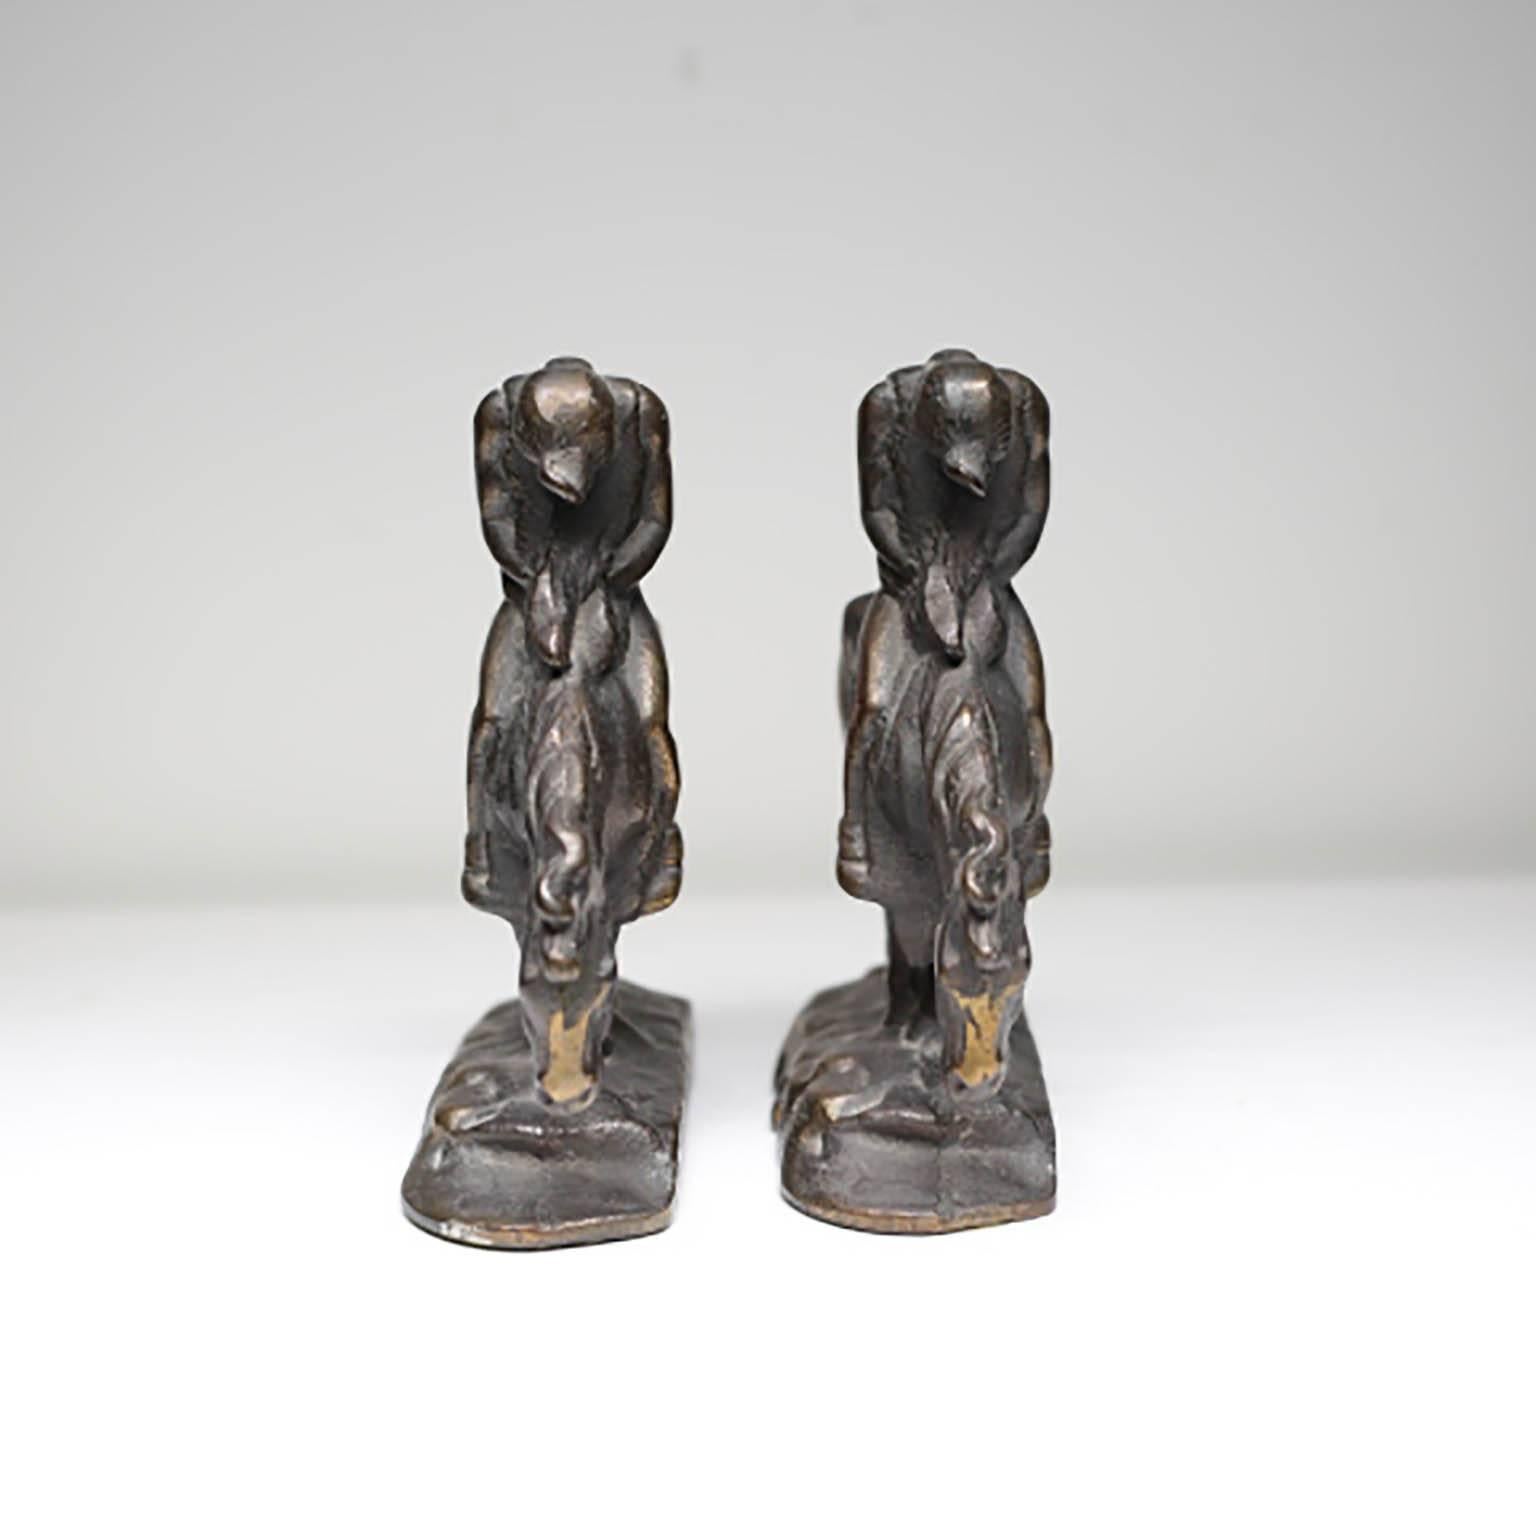 Pair of solid bronze bookends depicting a Native American on a horse.